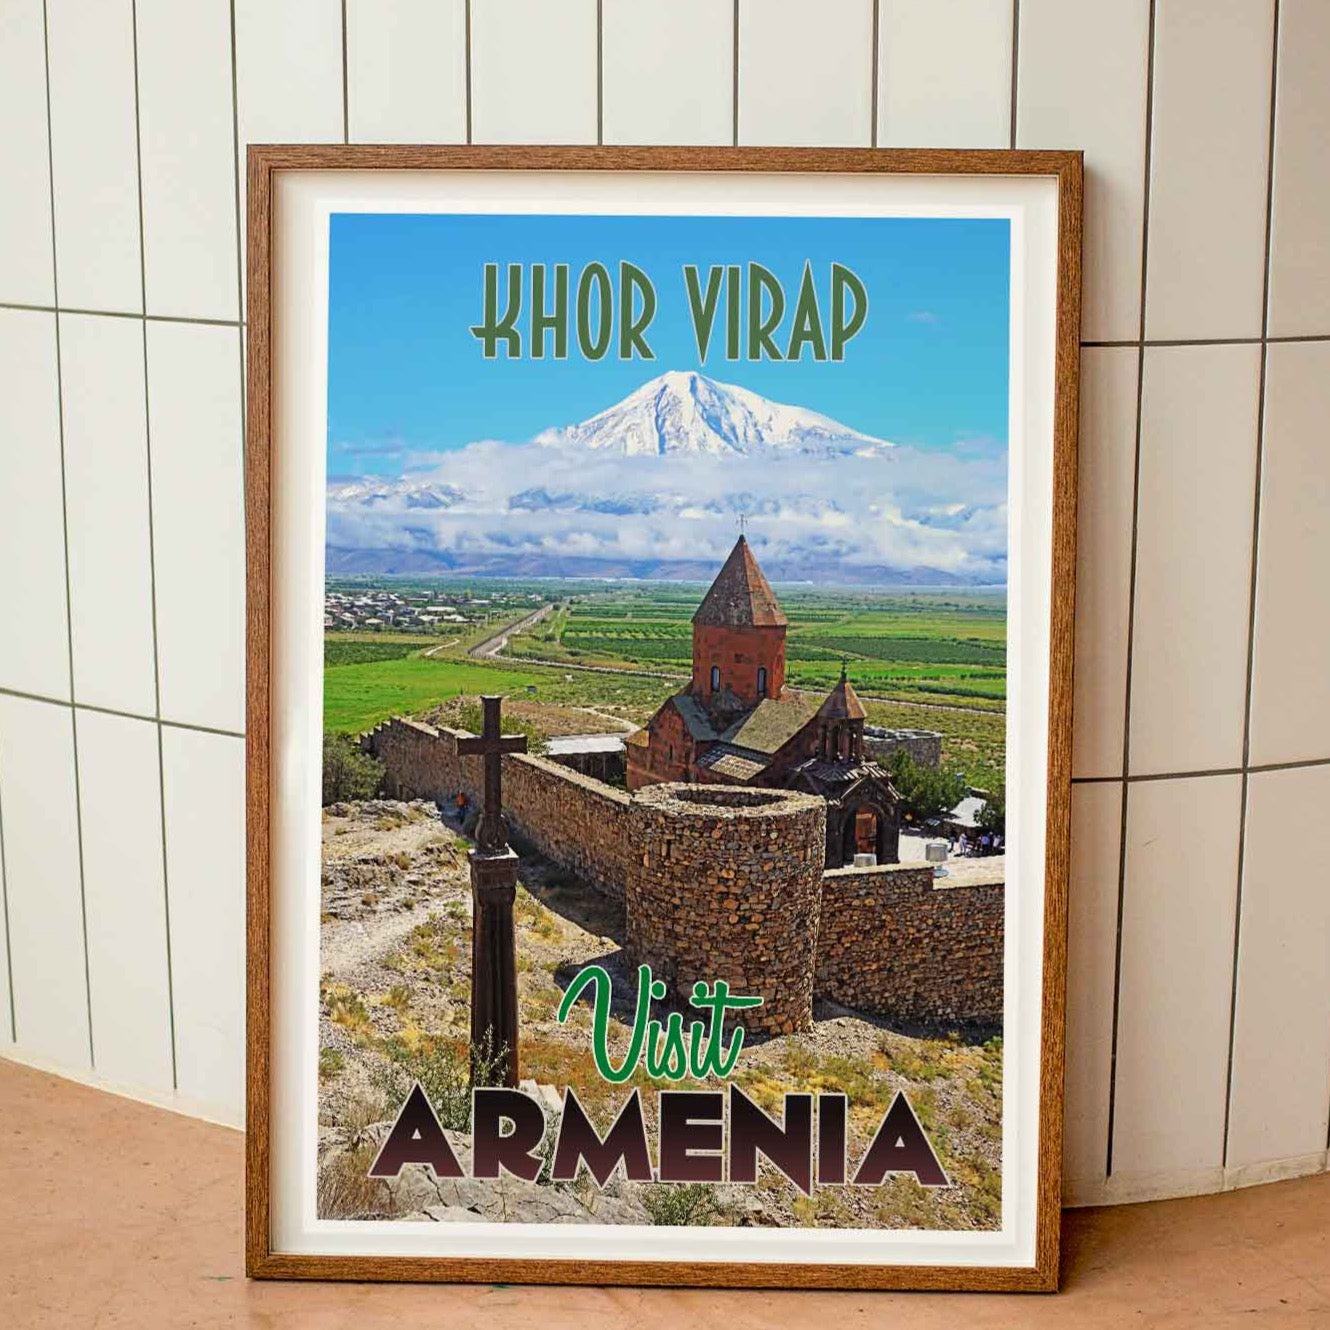 Framed vintage travel poster print featuring the iconic Khor Virab monastery in Armenia, representing the fascination of emerging travel destinations and the adventure of emerging world travel